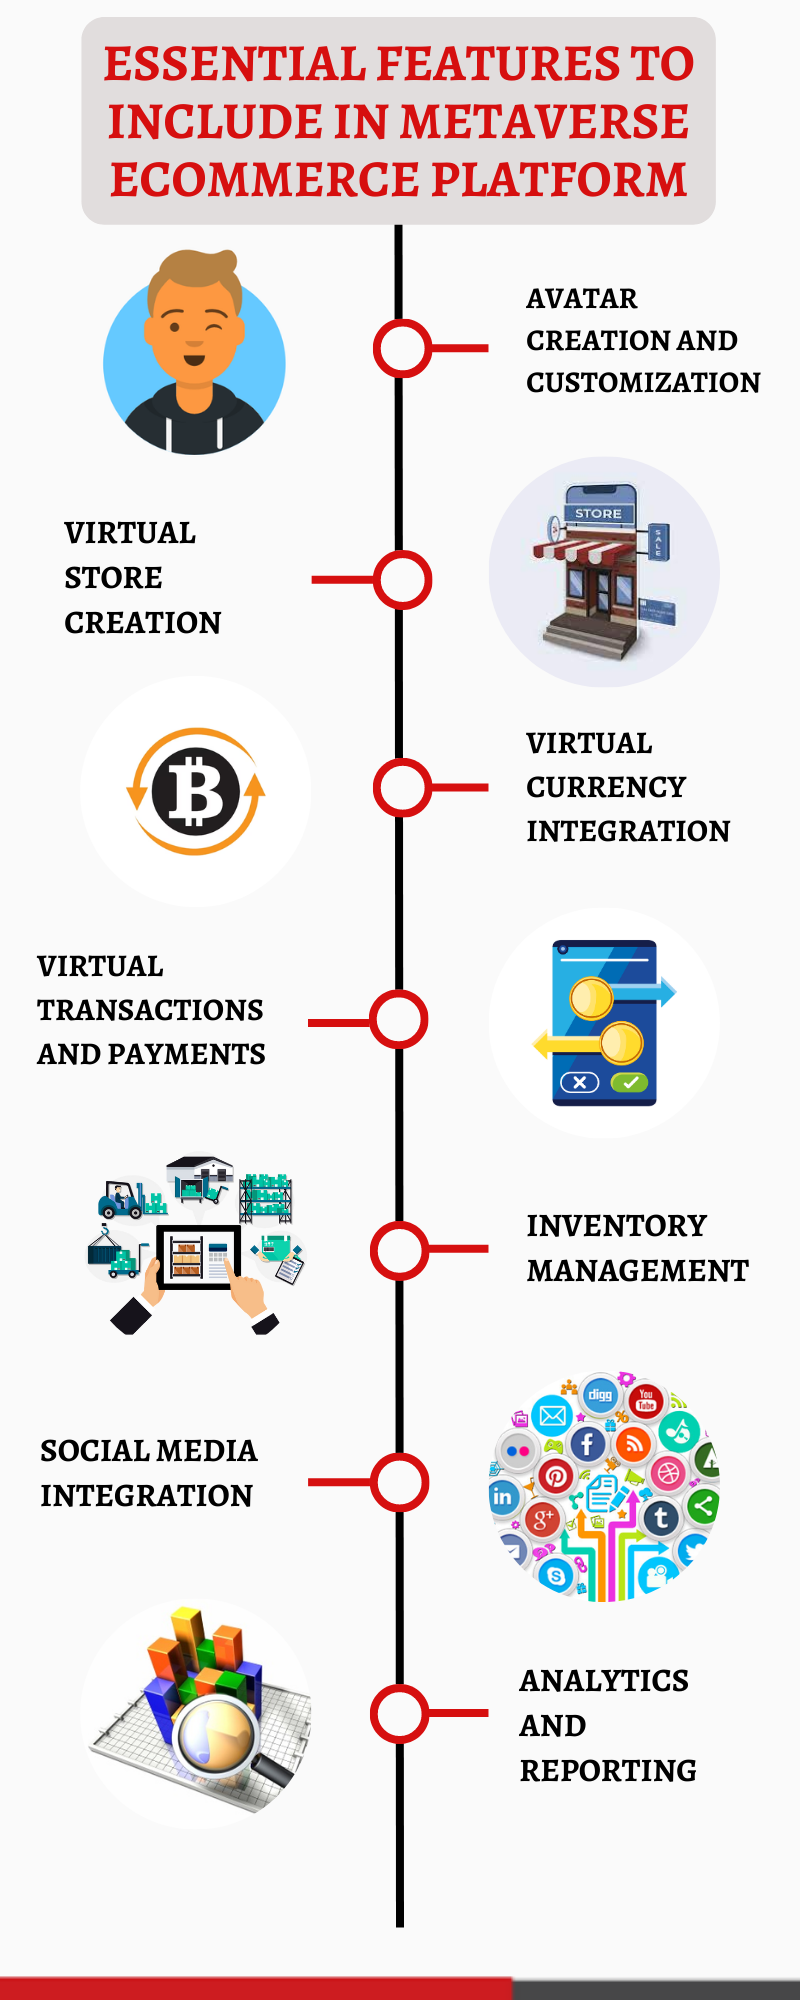 Essential Features To Include in Metaverse eCommerce Platform